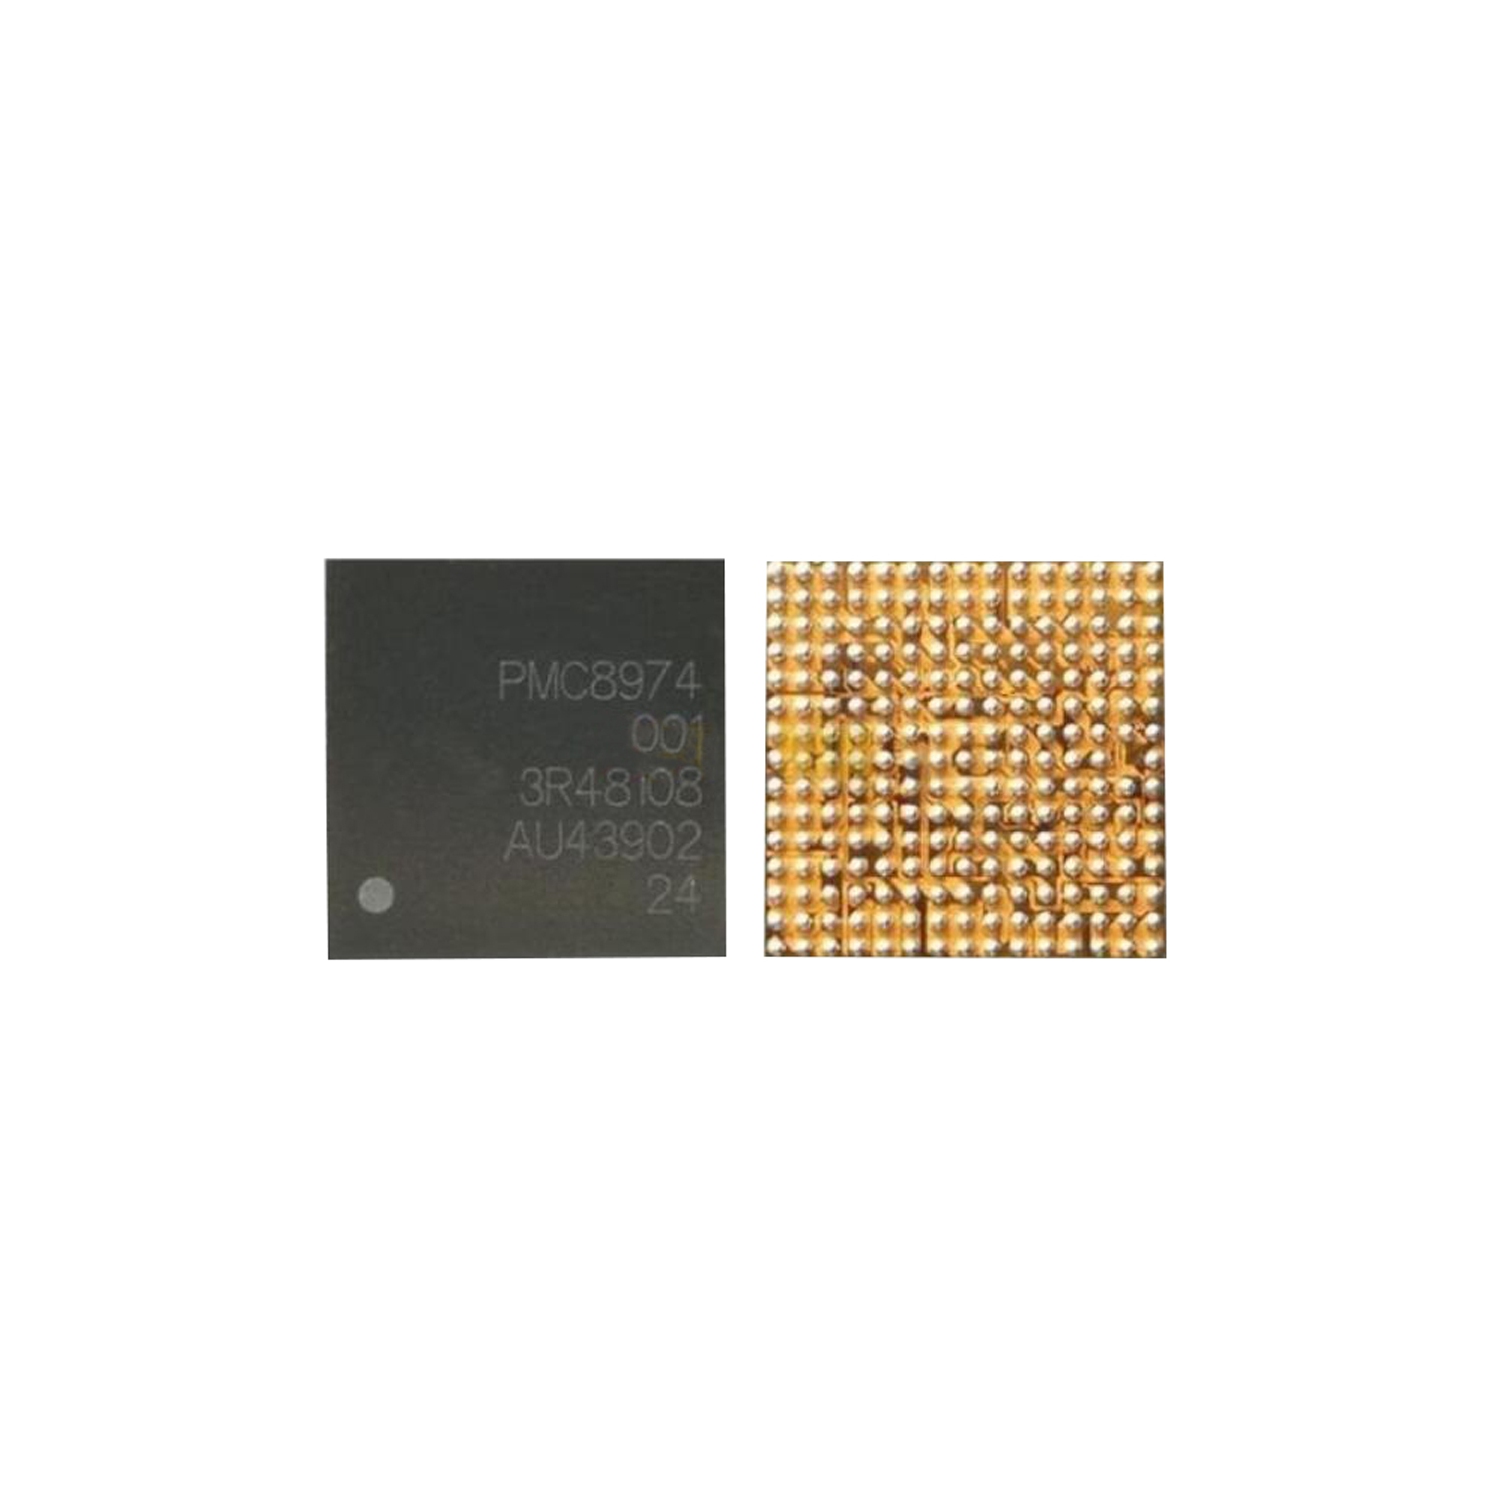 Replacement Big Main Power Supply IC Chip PMC8974 Compatible With Samsung Galaxy S5